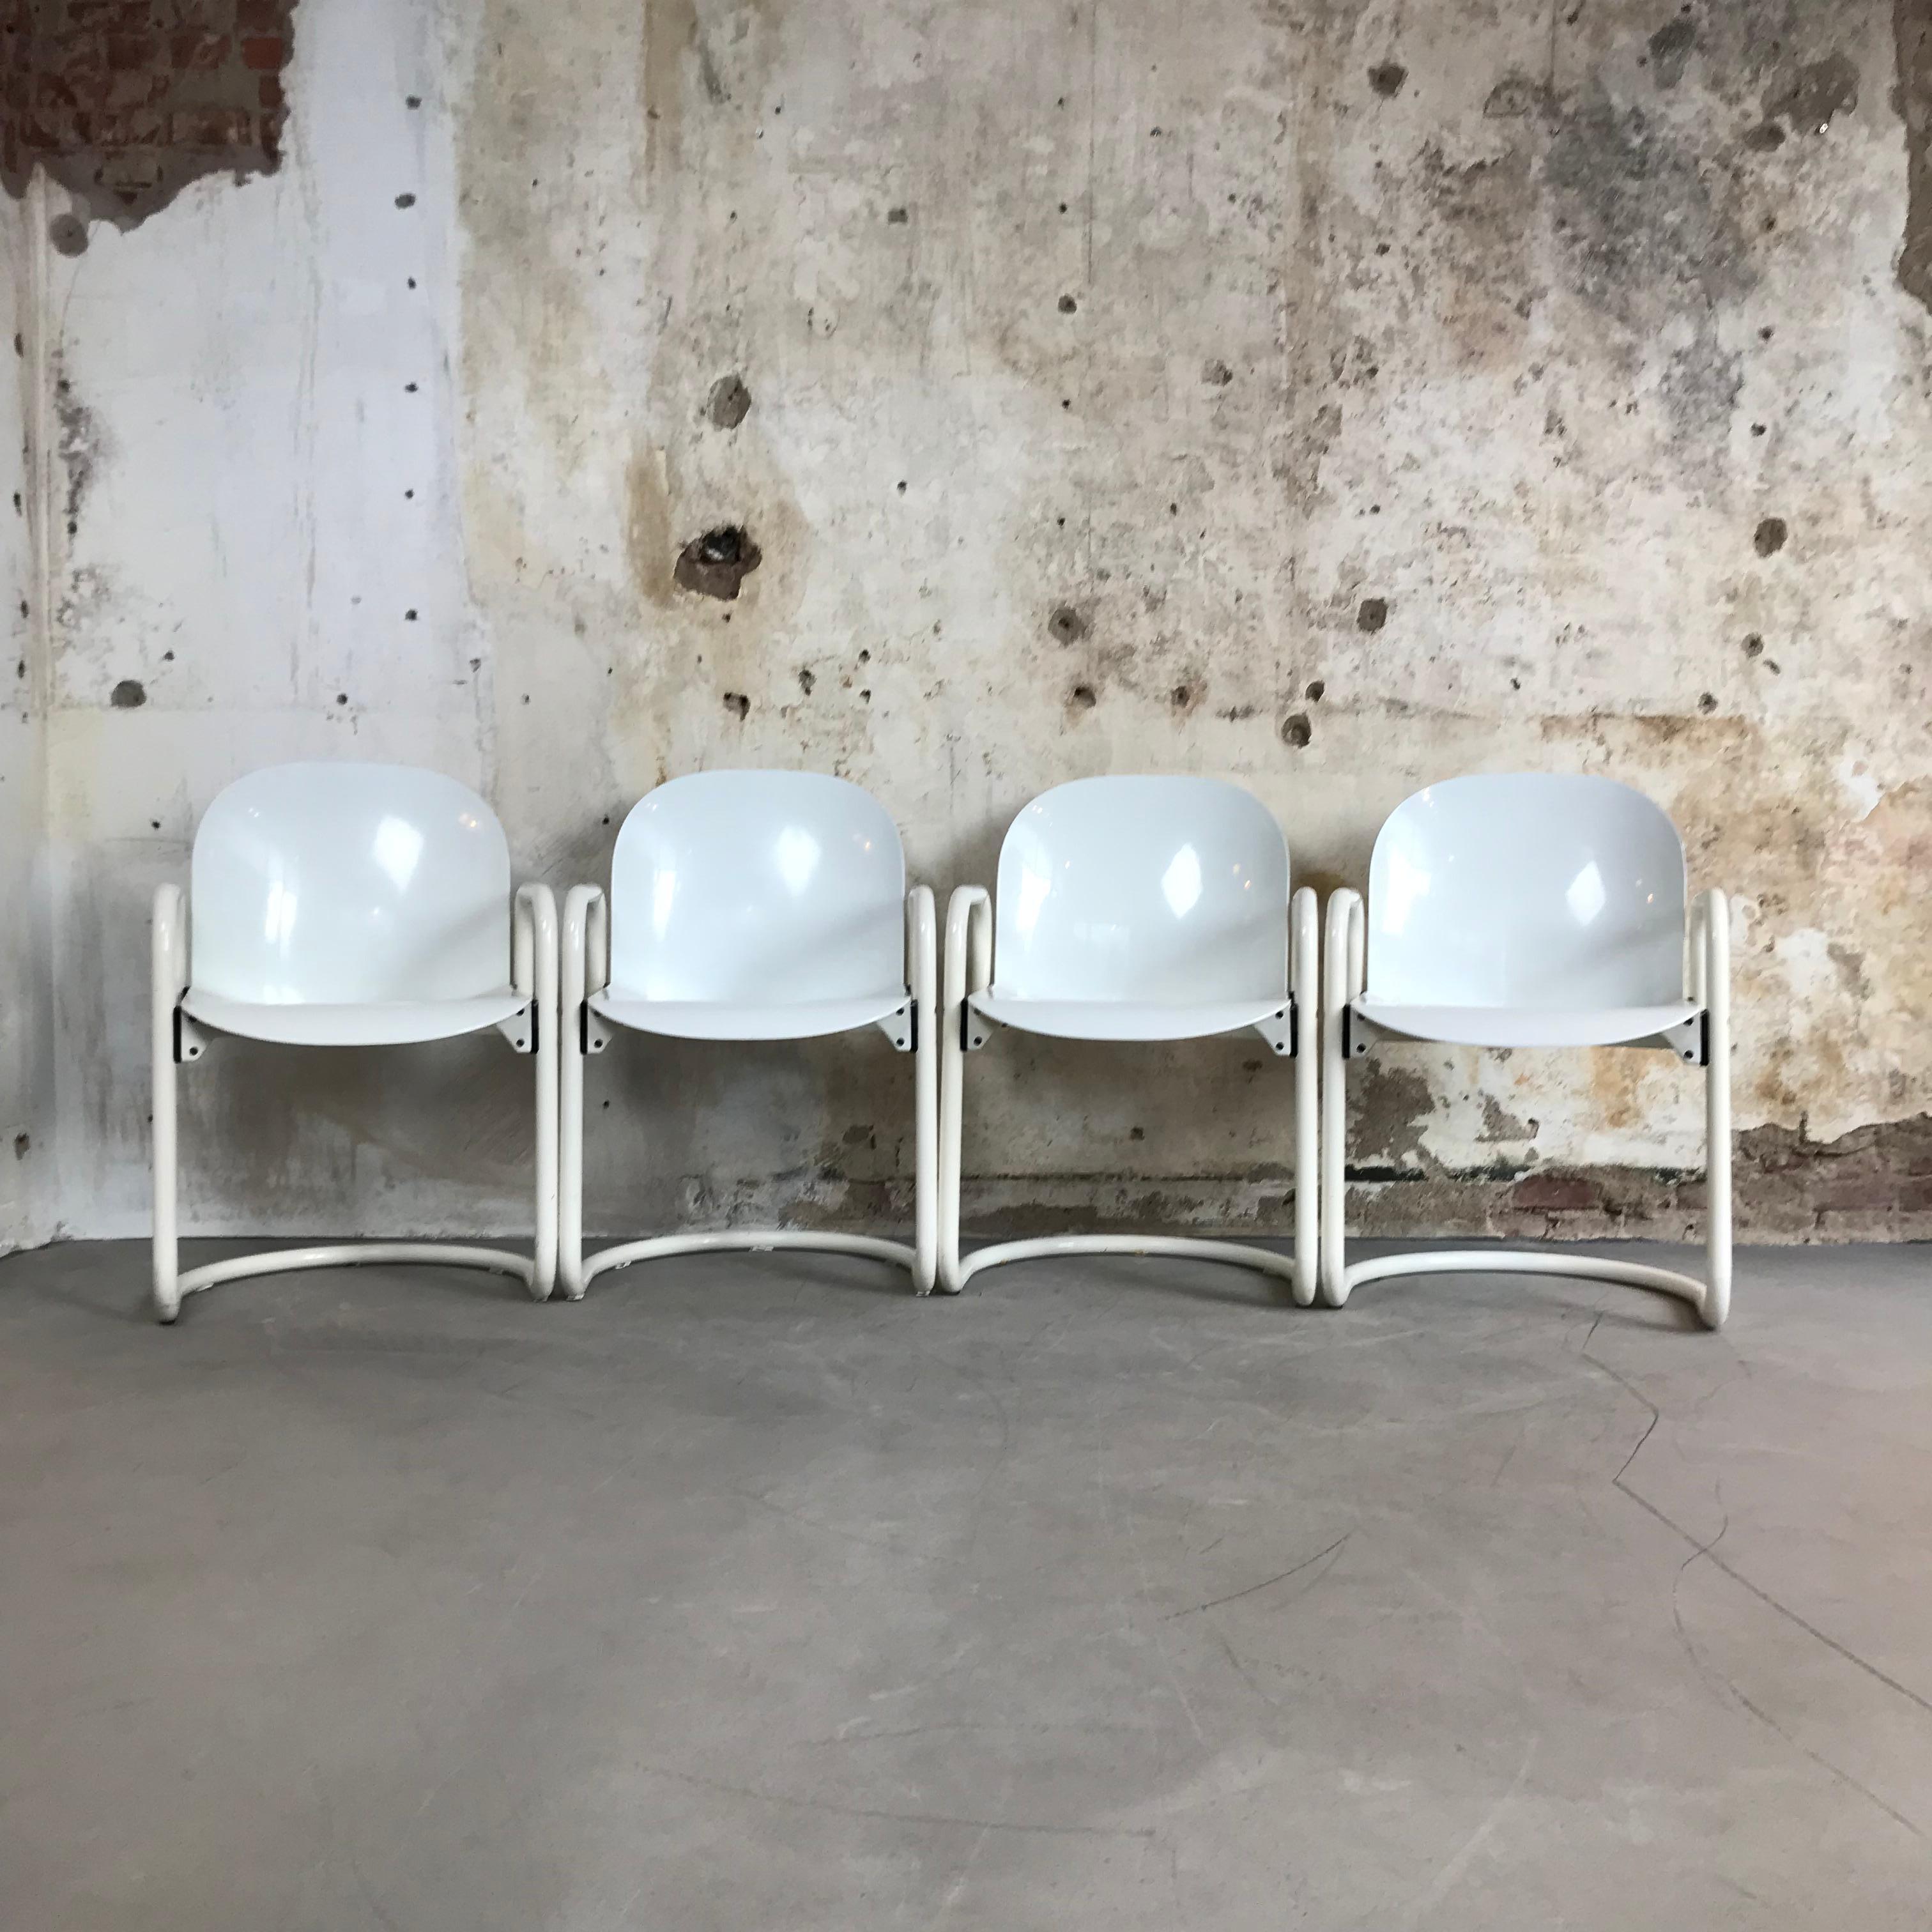 Set of four 'Dialogo' dining chairs by Tobia & Afra Scarpa for B&B Italia, circa 1970, Italy.
Very comfortable chairs with seat and back in molded (ABS) plastic with a nice glossy finish.
Structure in very good condition, some little signs due to